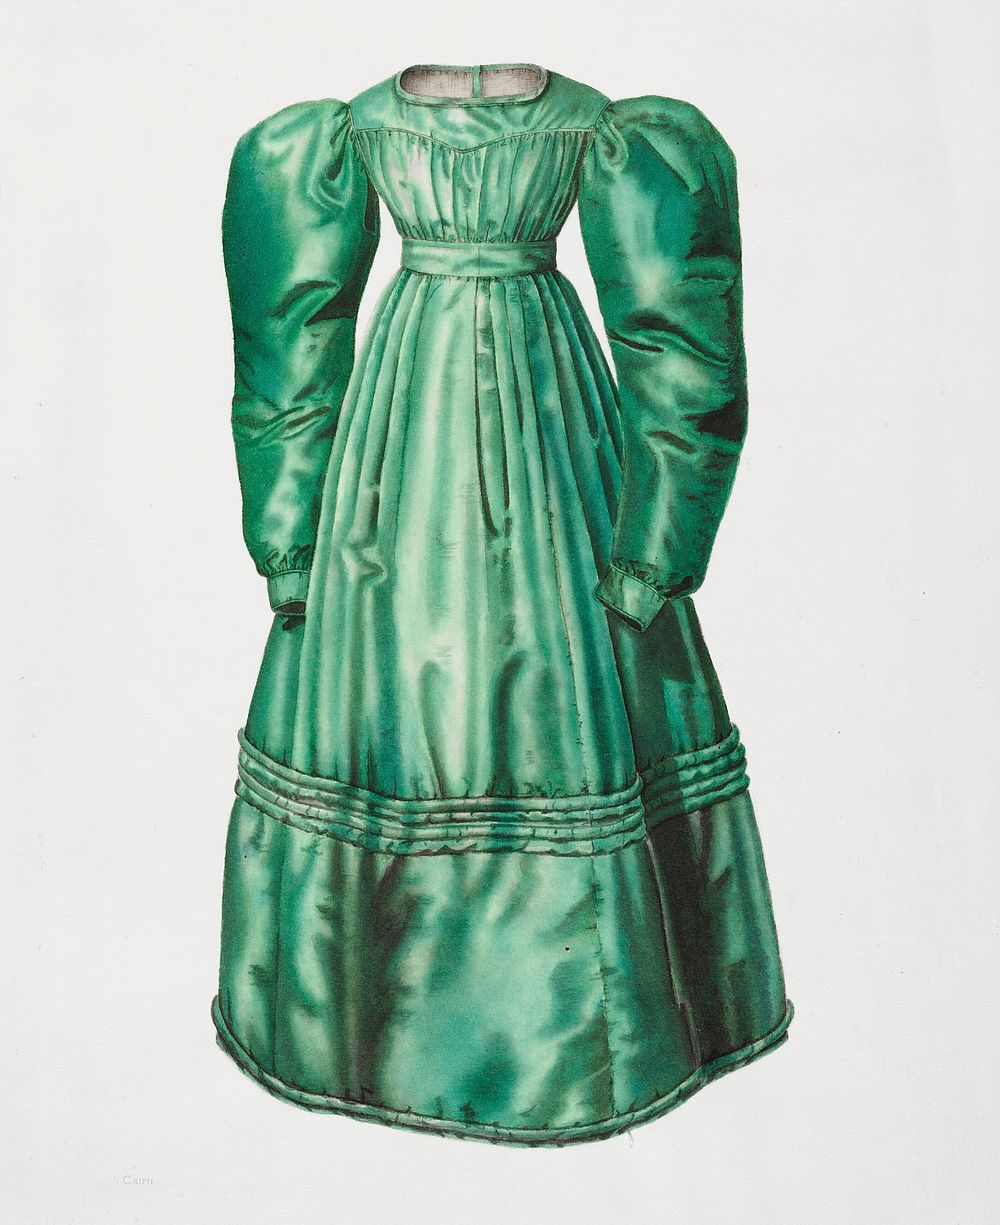 Dress (ca.1938) by Nancy Crimi. Original from The National Gallery of Art. Digitally enhanced by rawpixel.